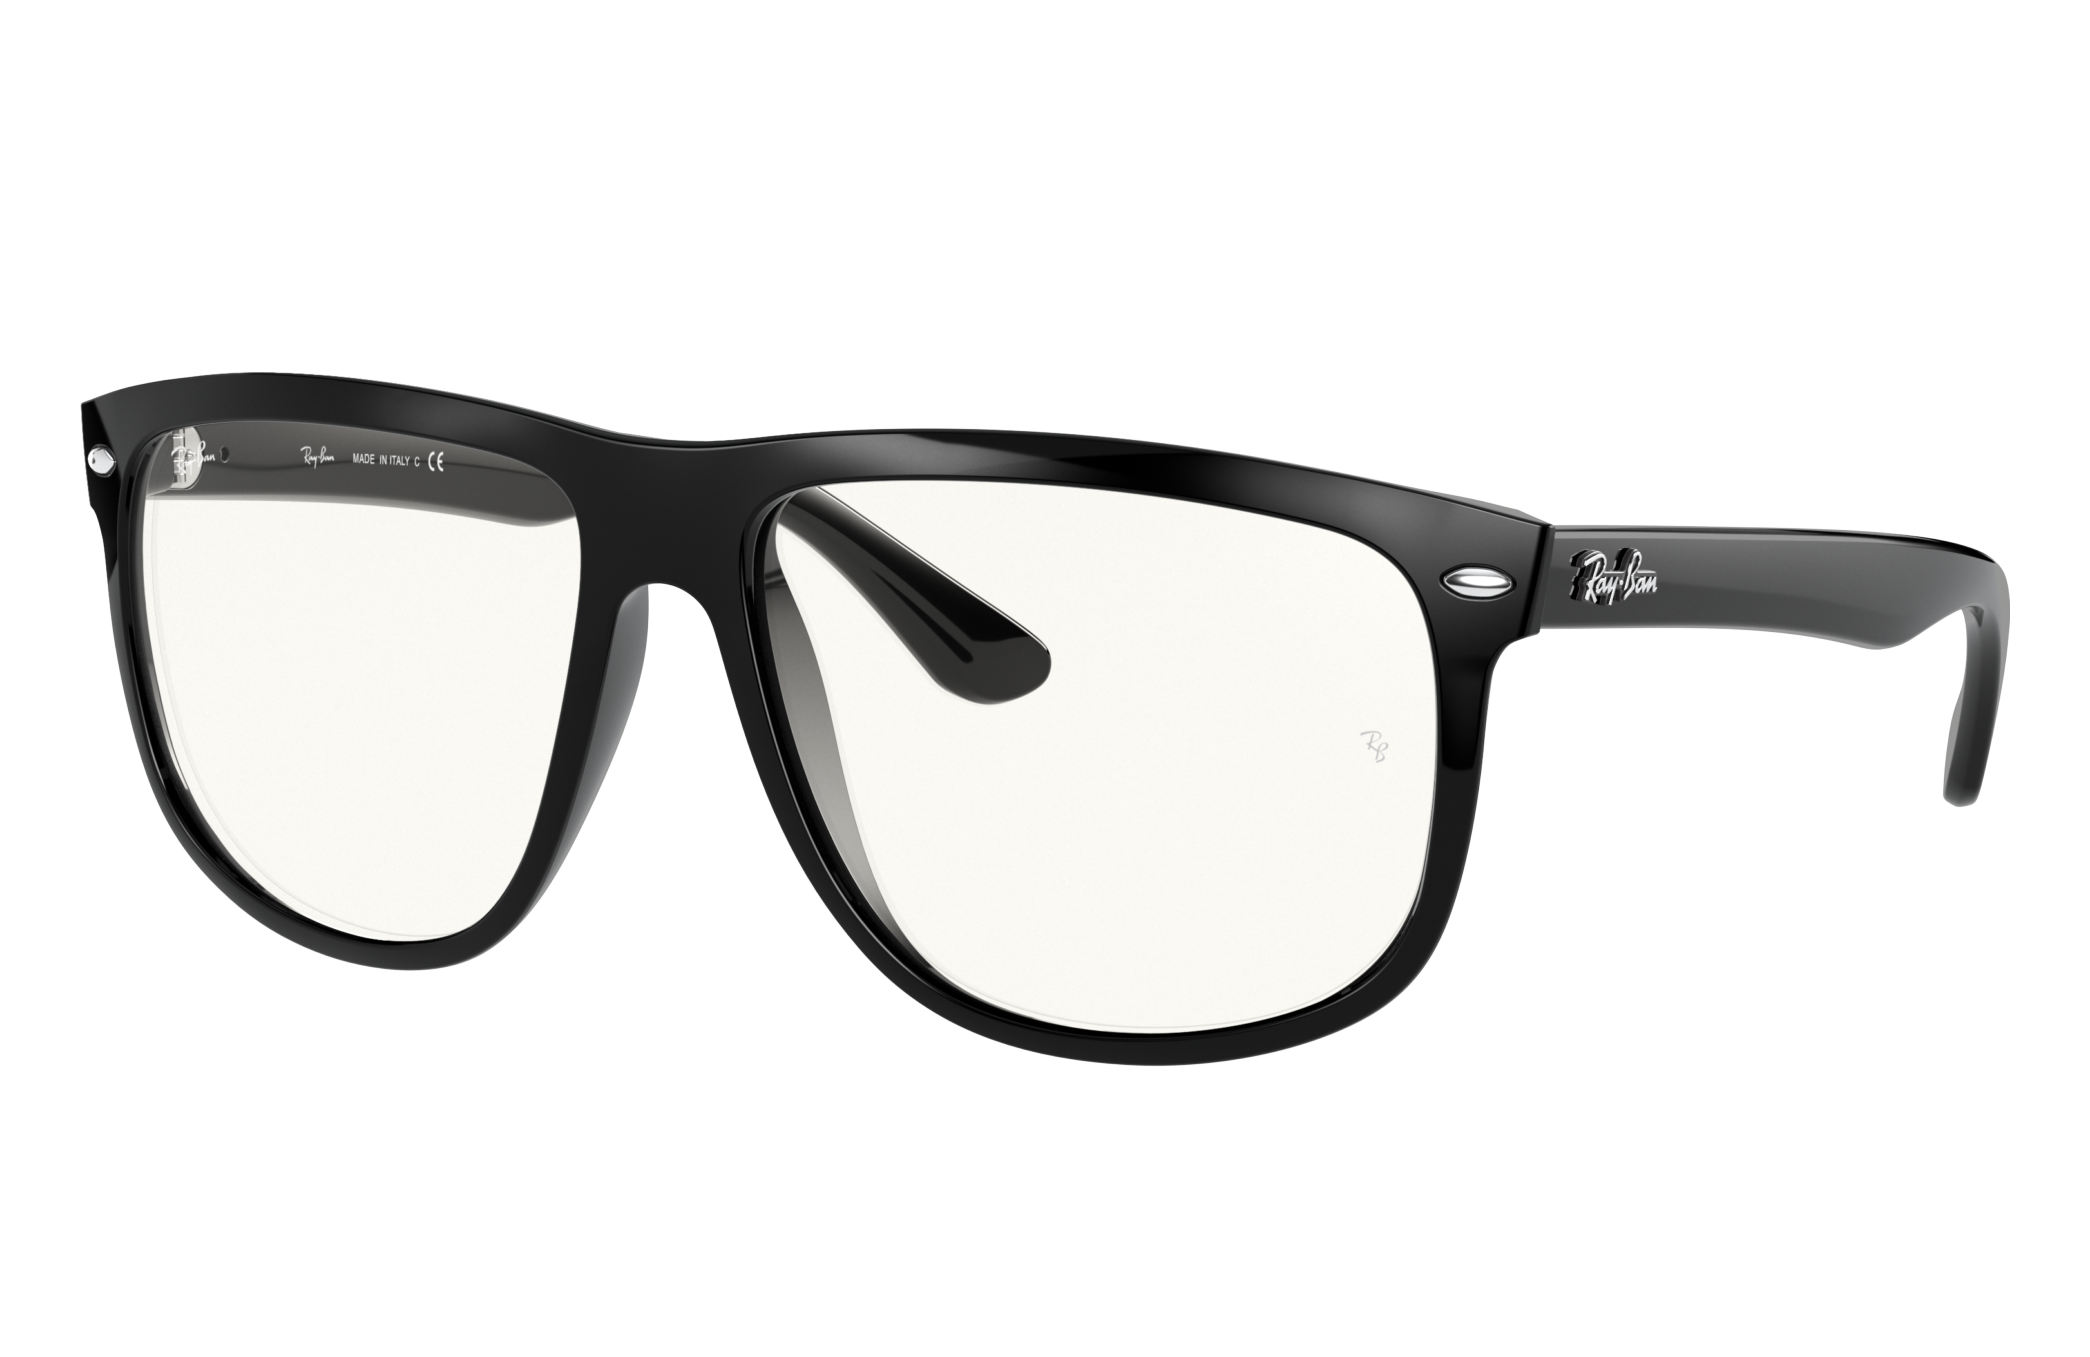 Ray-Ban Rb4147 Clear RB4147 Shiny Black 